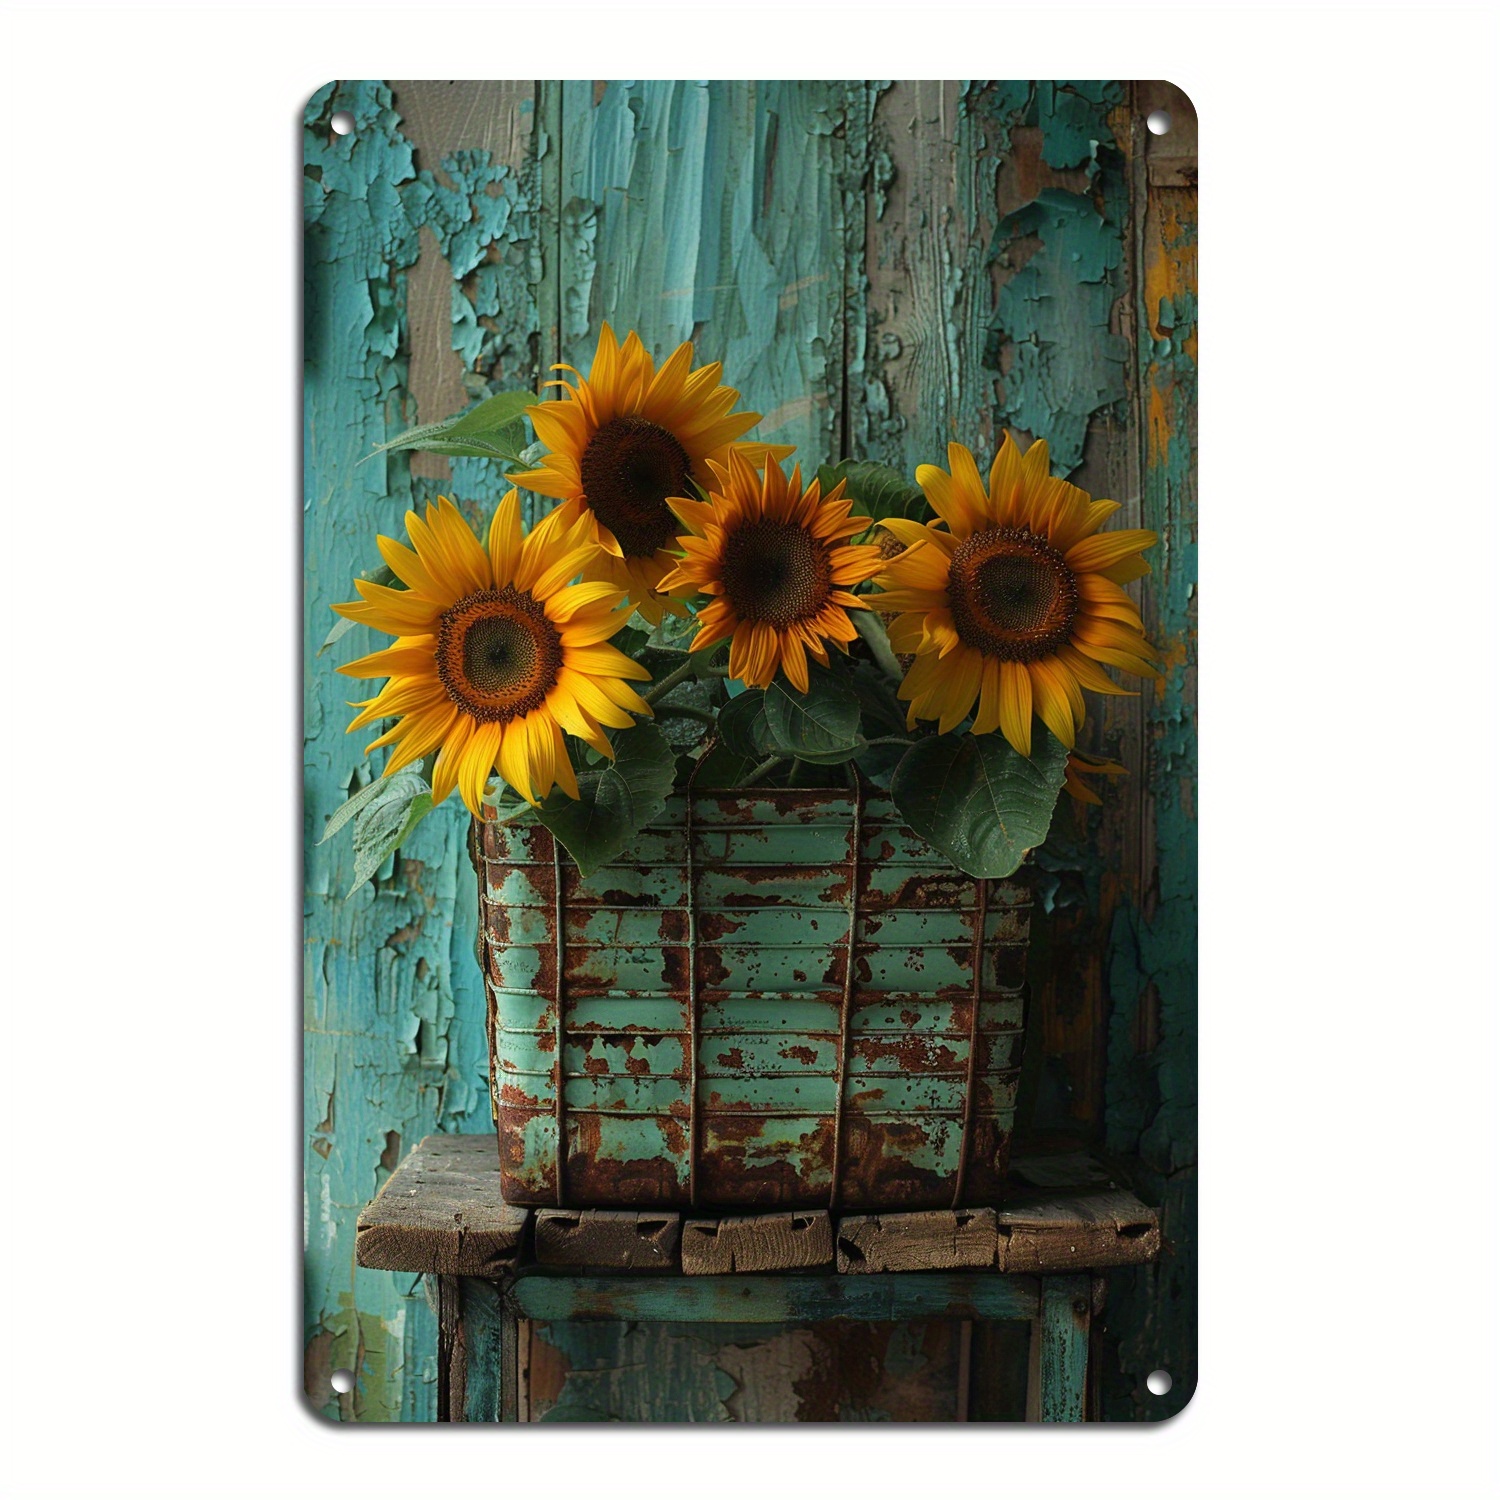 

Yellow Sunflower Vintage Metal Tin Sign, Farmhouse Kitchen Wall Country Home Decor, Coffee Bar Signs Gifts Garden Decoration